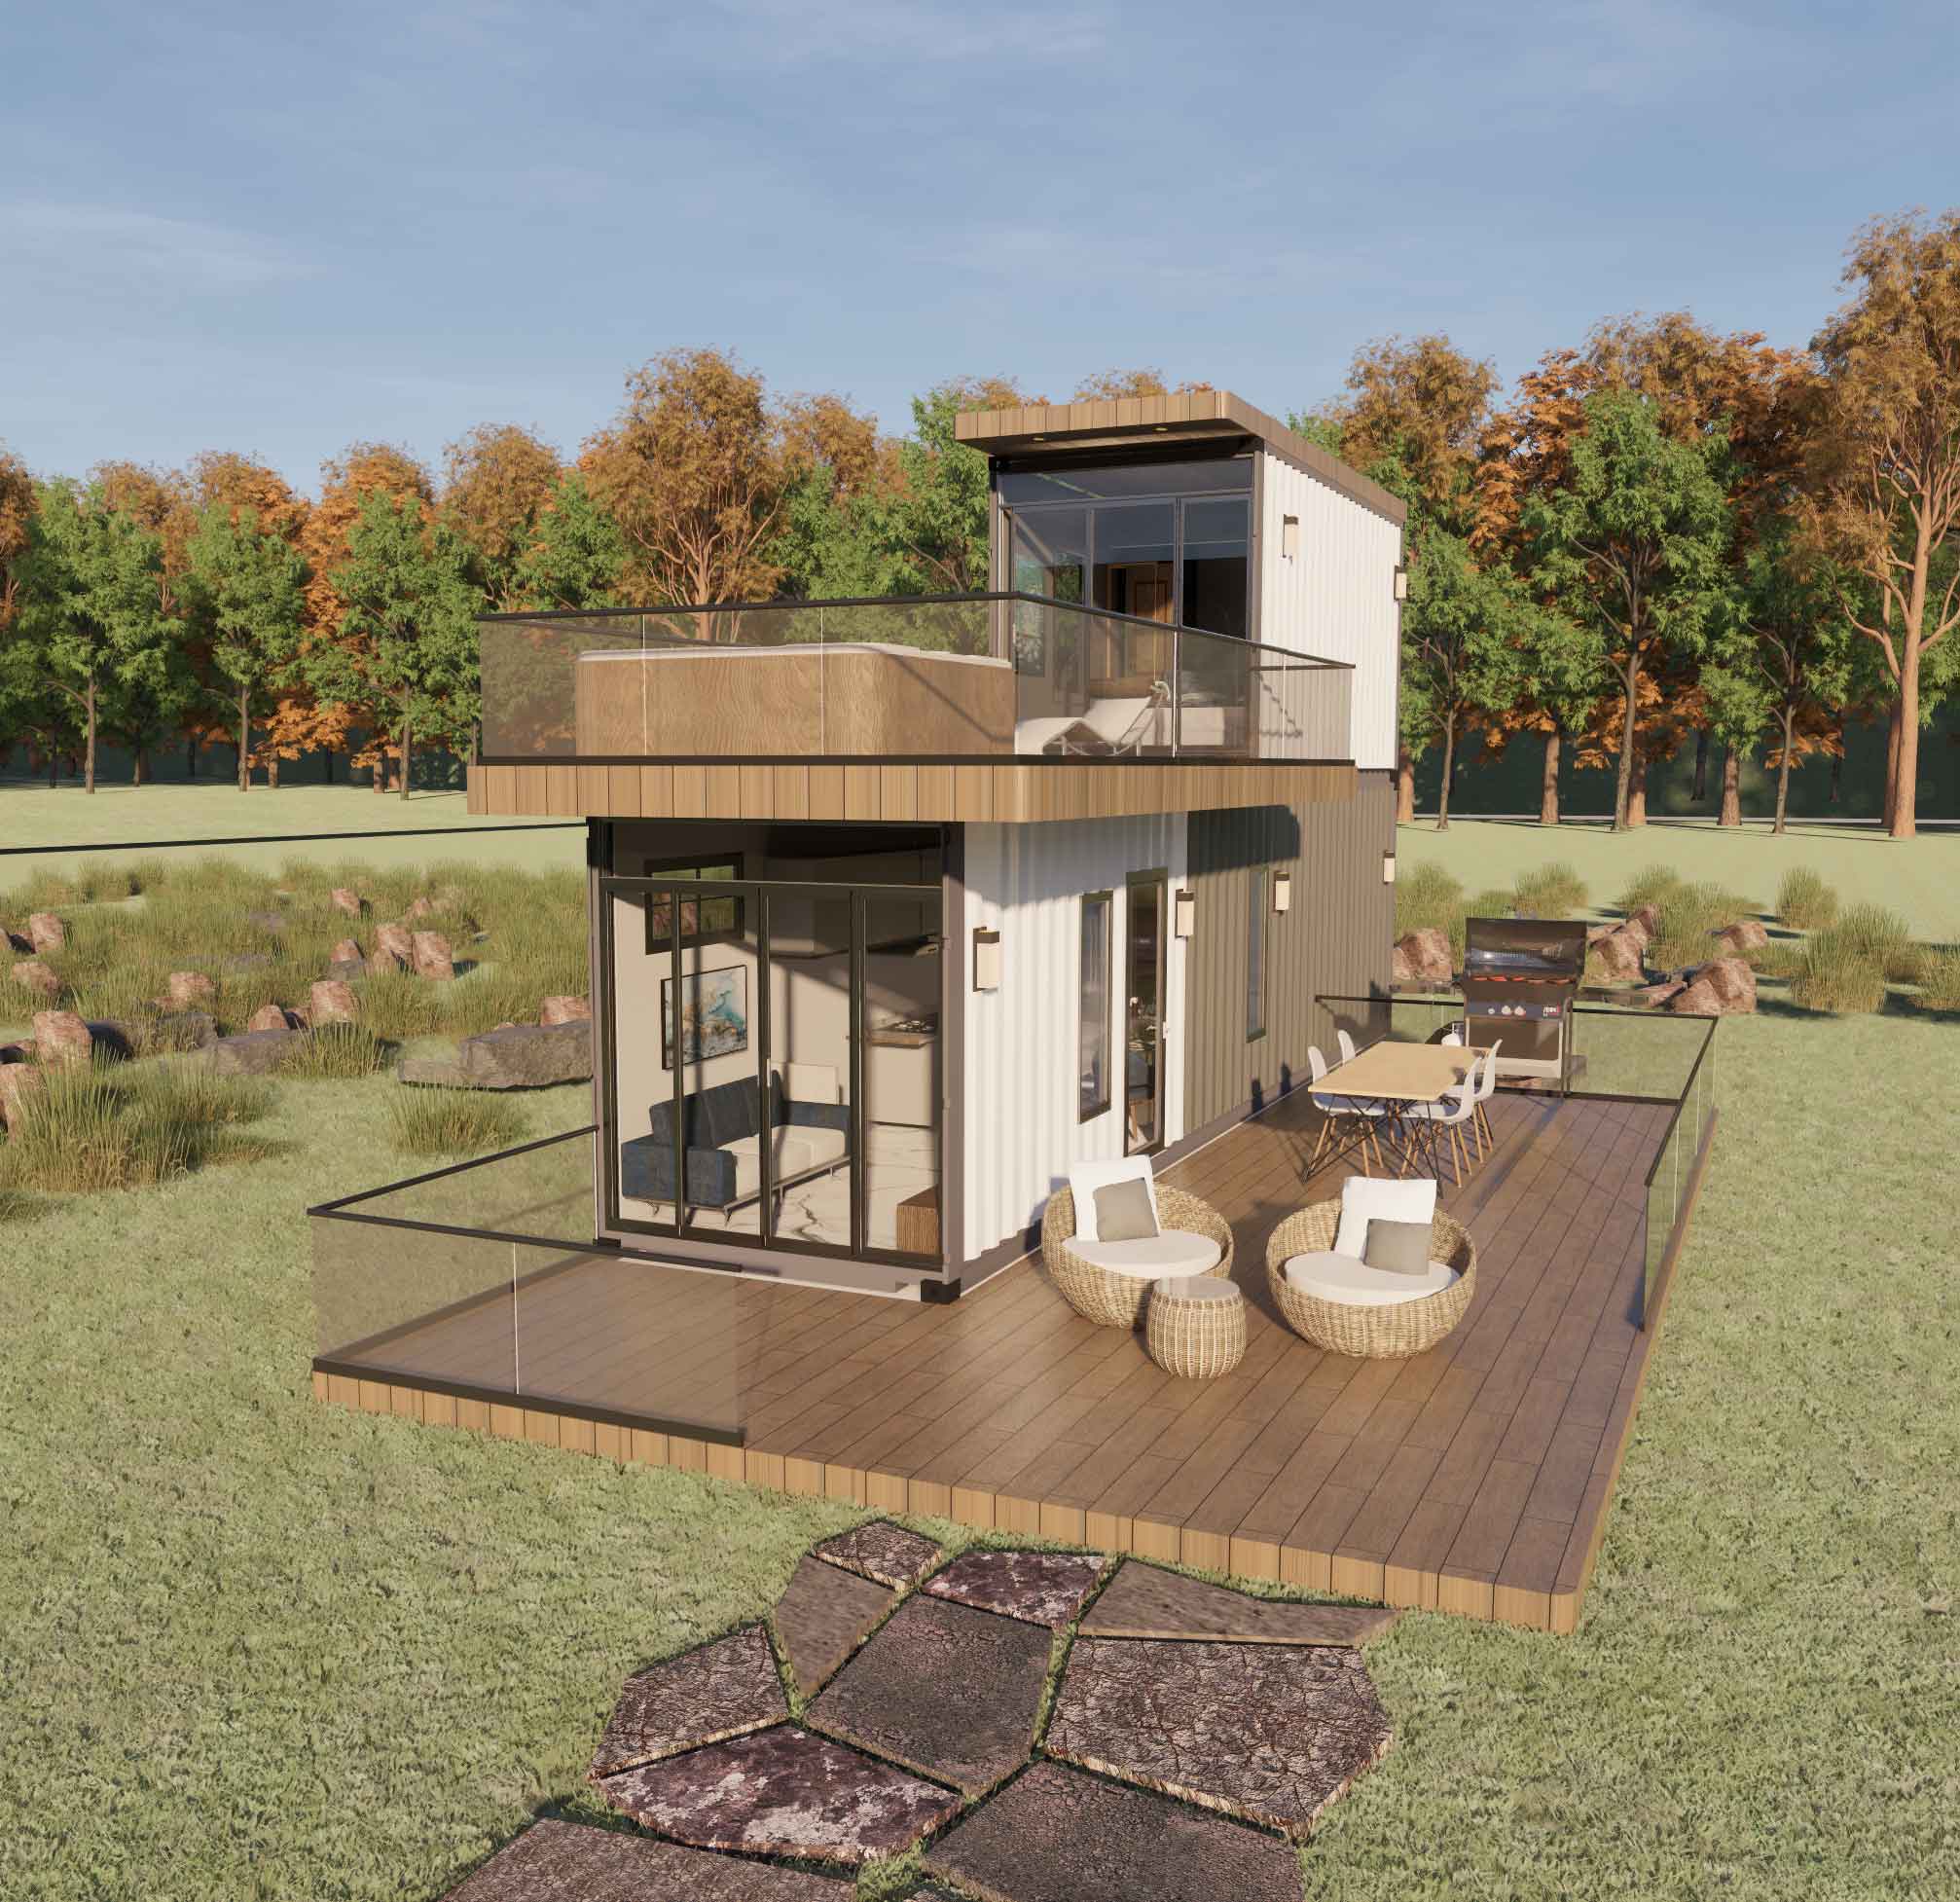 480 sq.ft. Shipping Container Home Plans